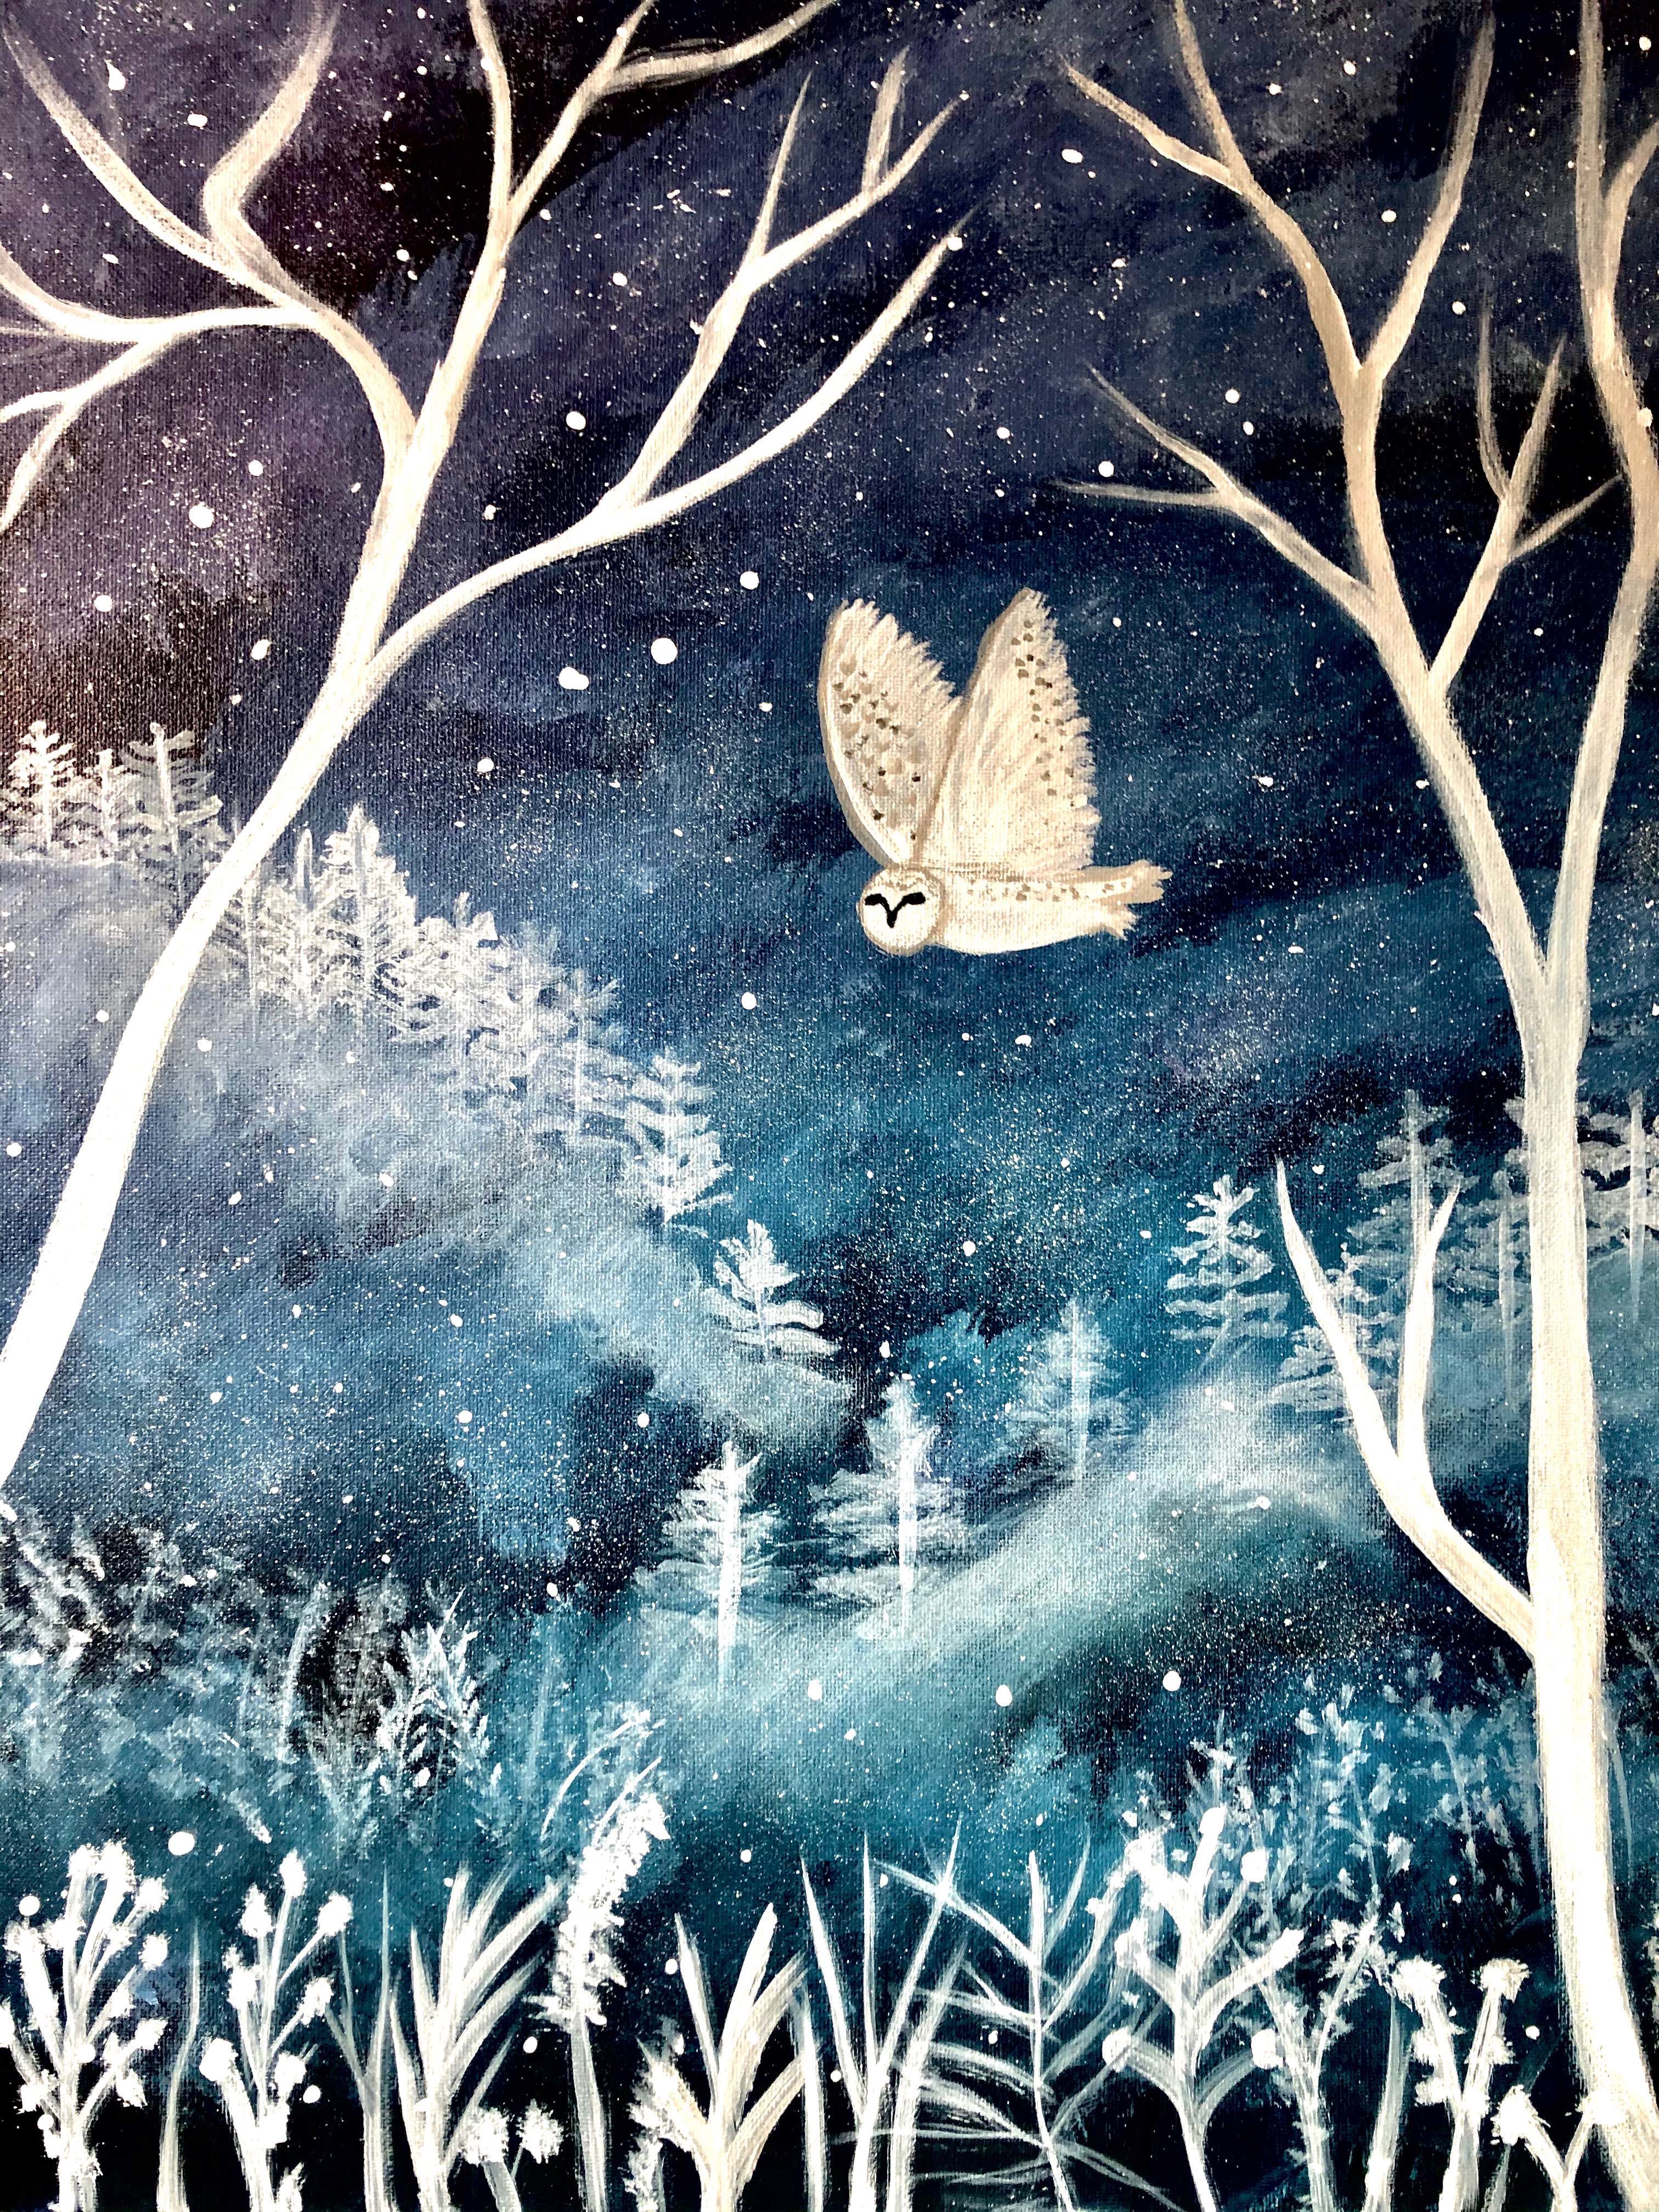 A Soaring owl in magical forest night experience project by Yaymaker